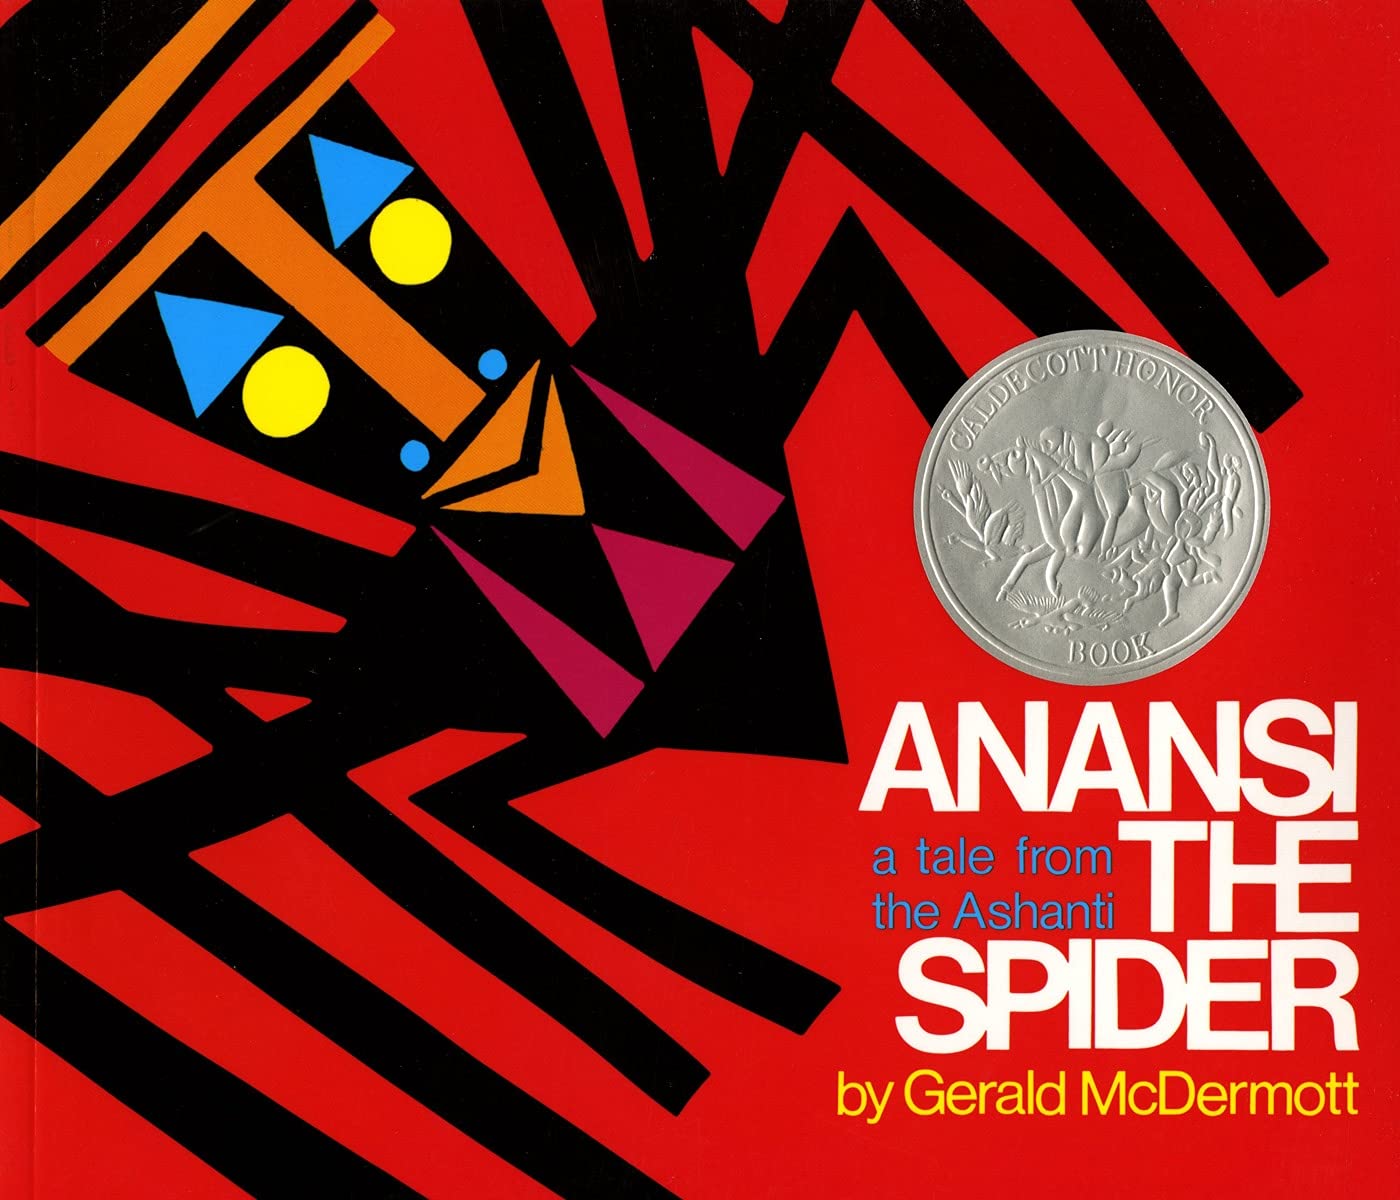 Cover of Anansi the Spider, featuring a two-dimensional image of Anansi, a spider with a human-like face, against a red background.